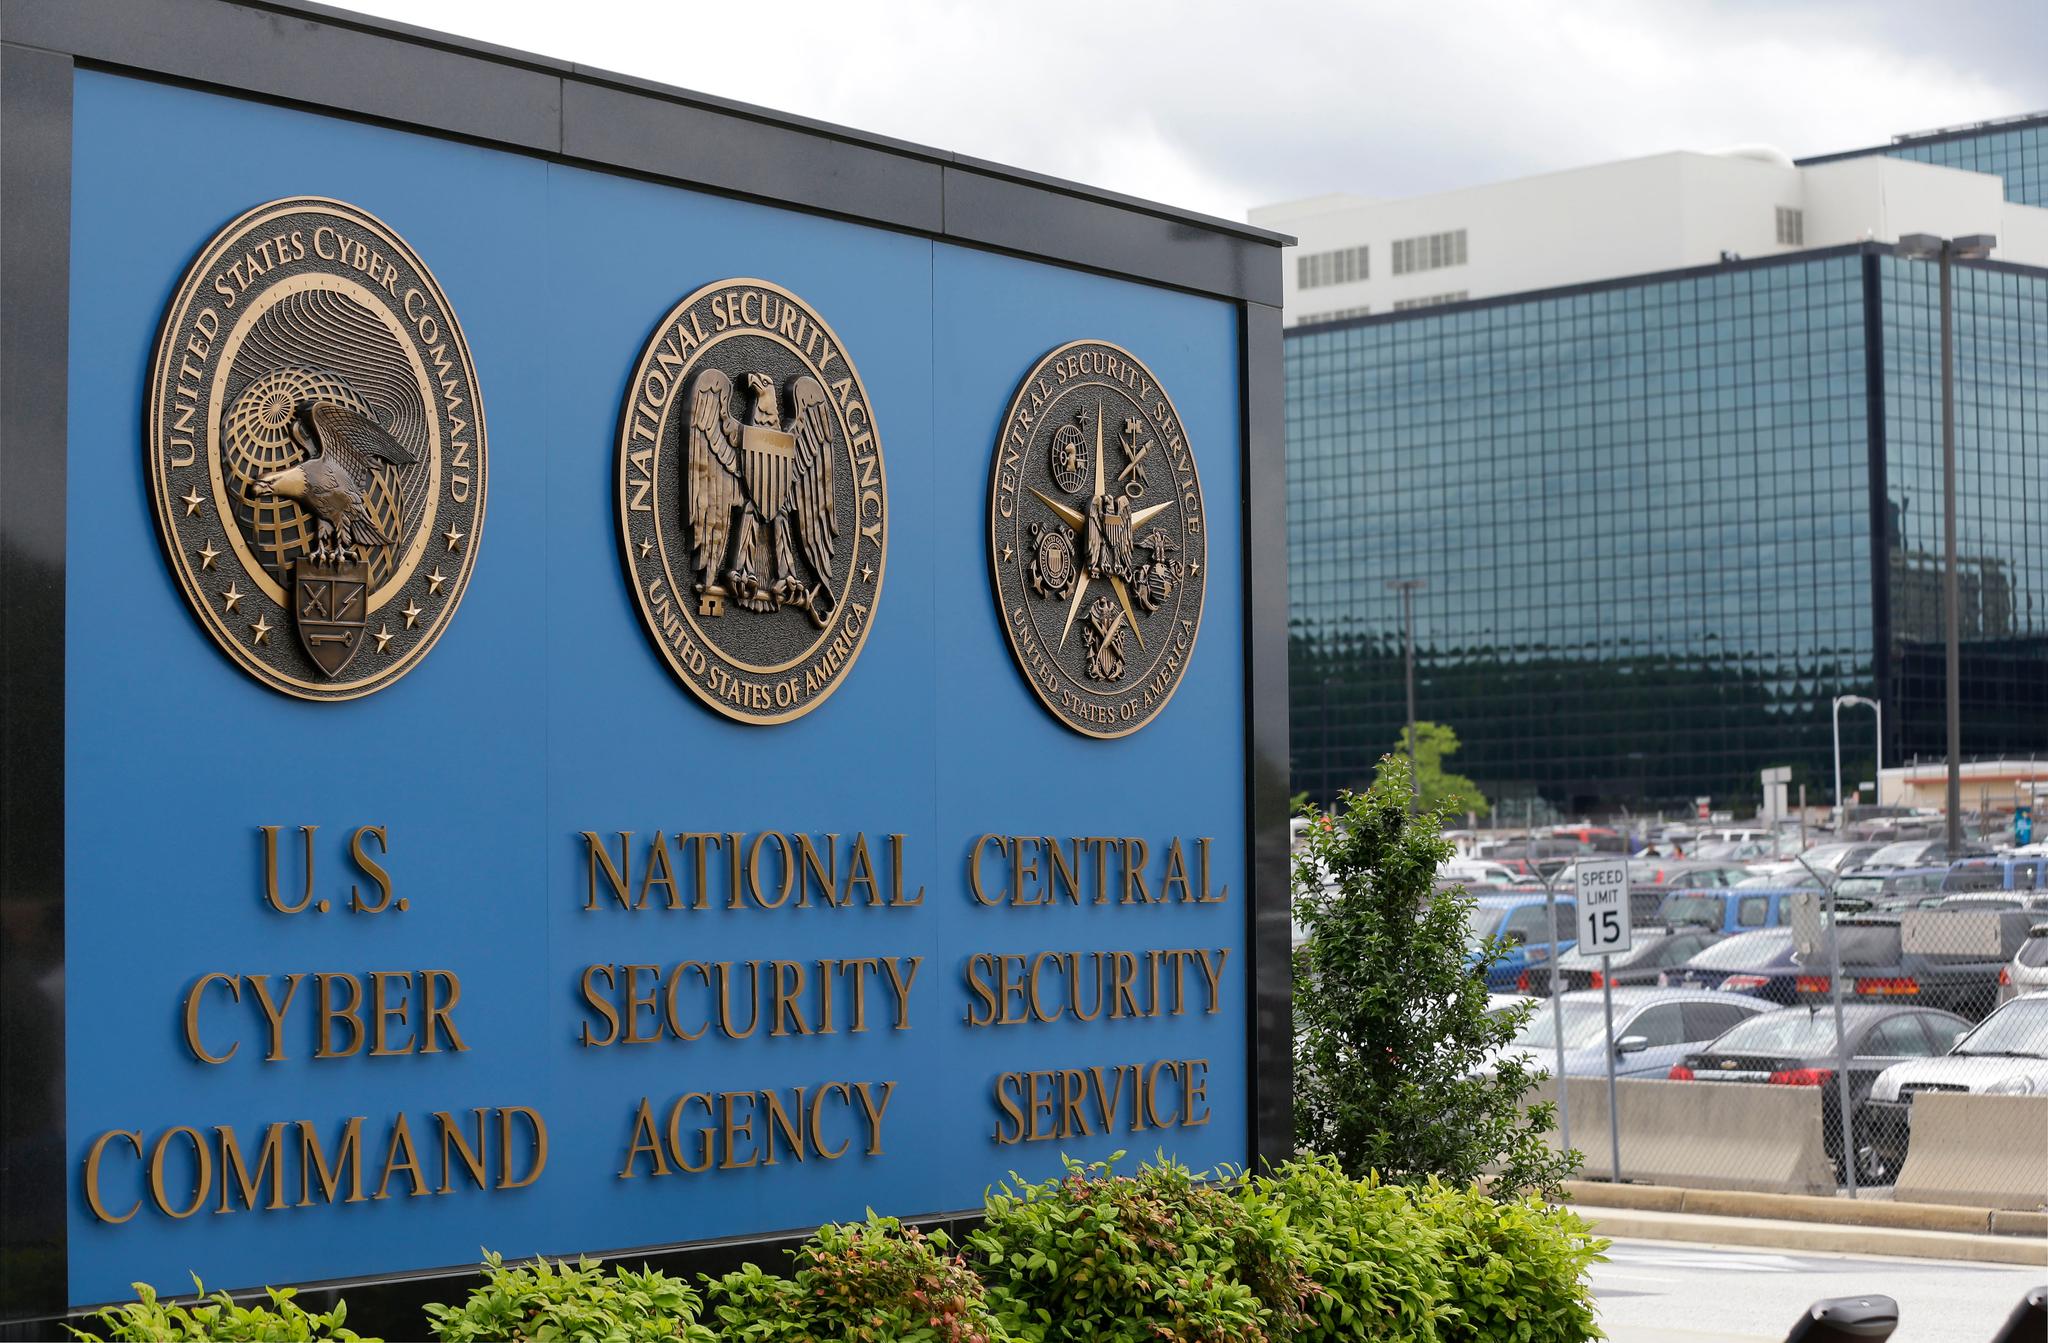 National Security Administration (NSA) campus in Fort Meade, Maryland